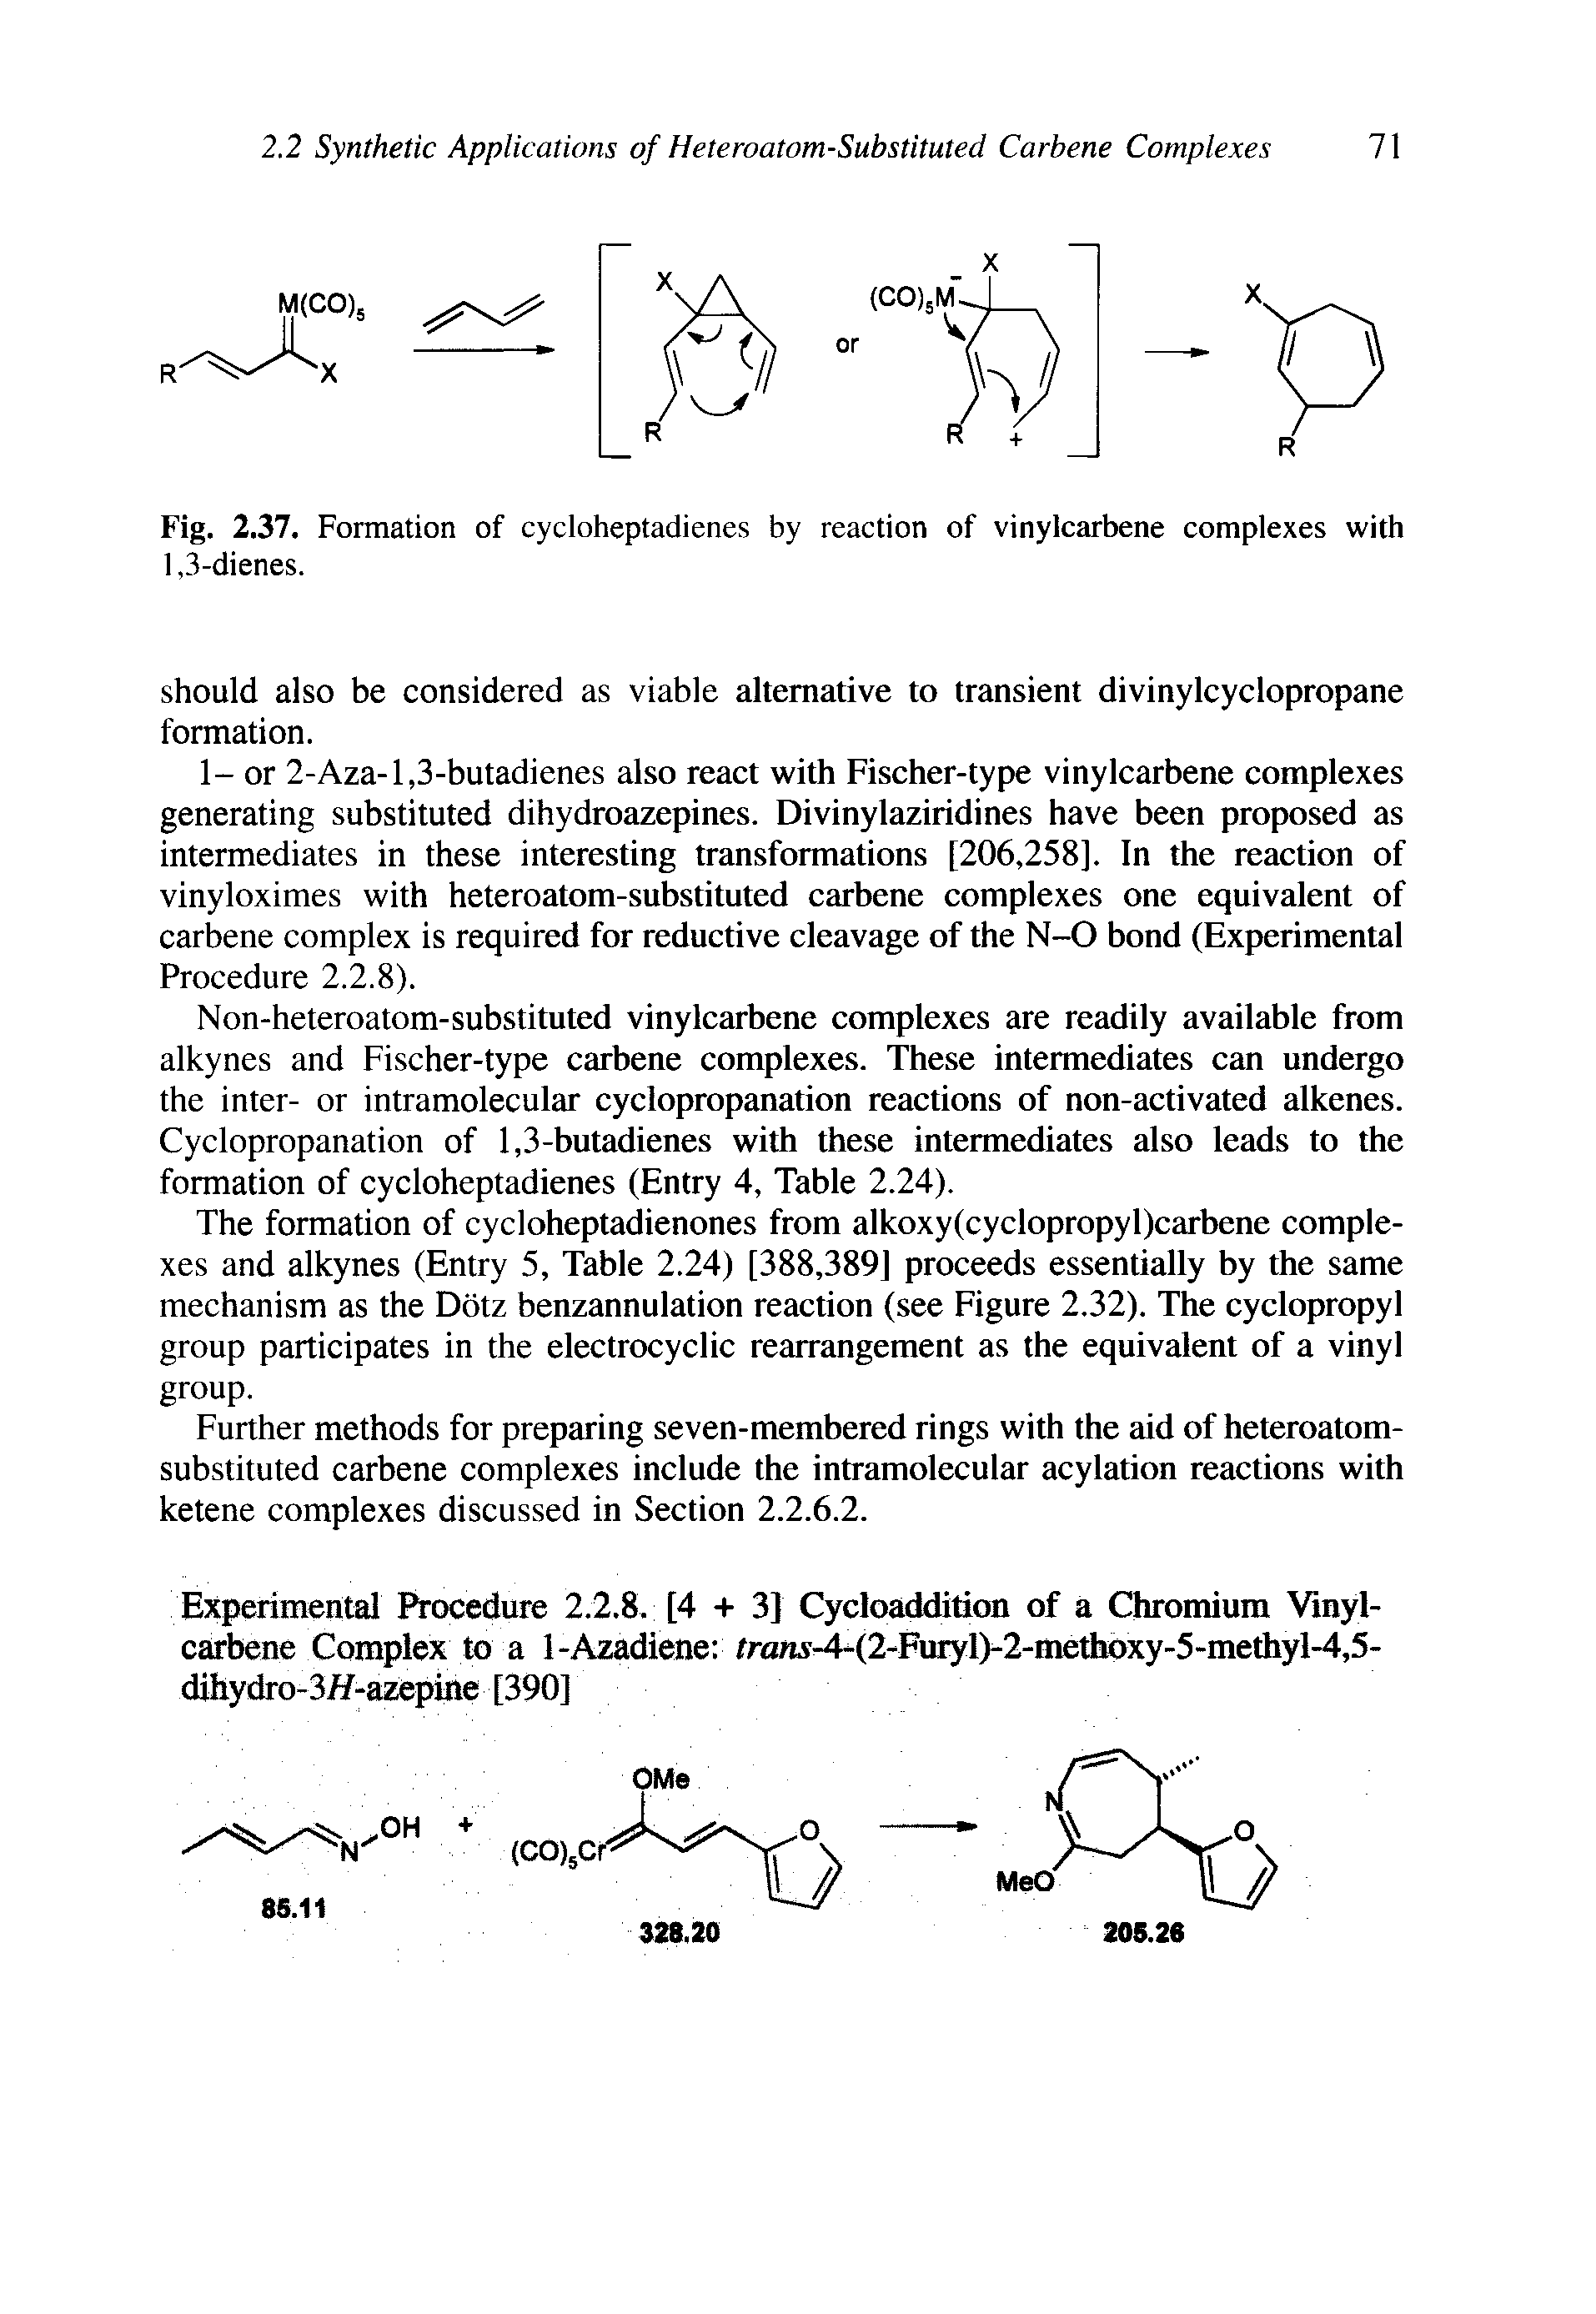 Fig. 2.37, Formation of cycloheptadienes by reaction of vinylcarbene complexes with 1,3-dienes.